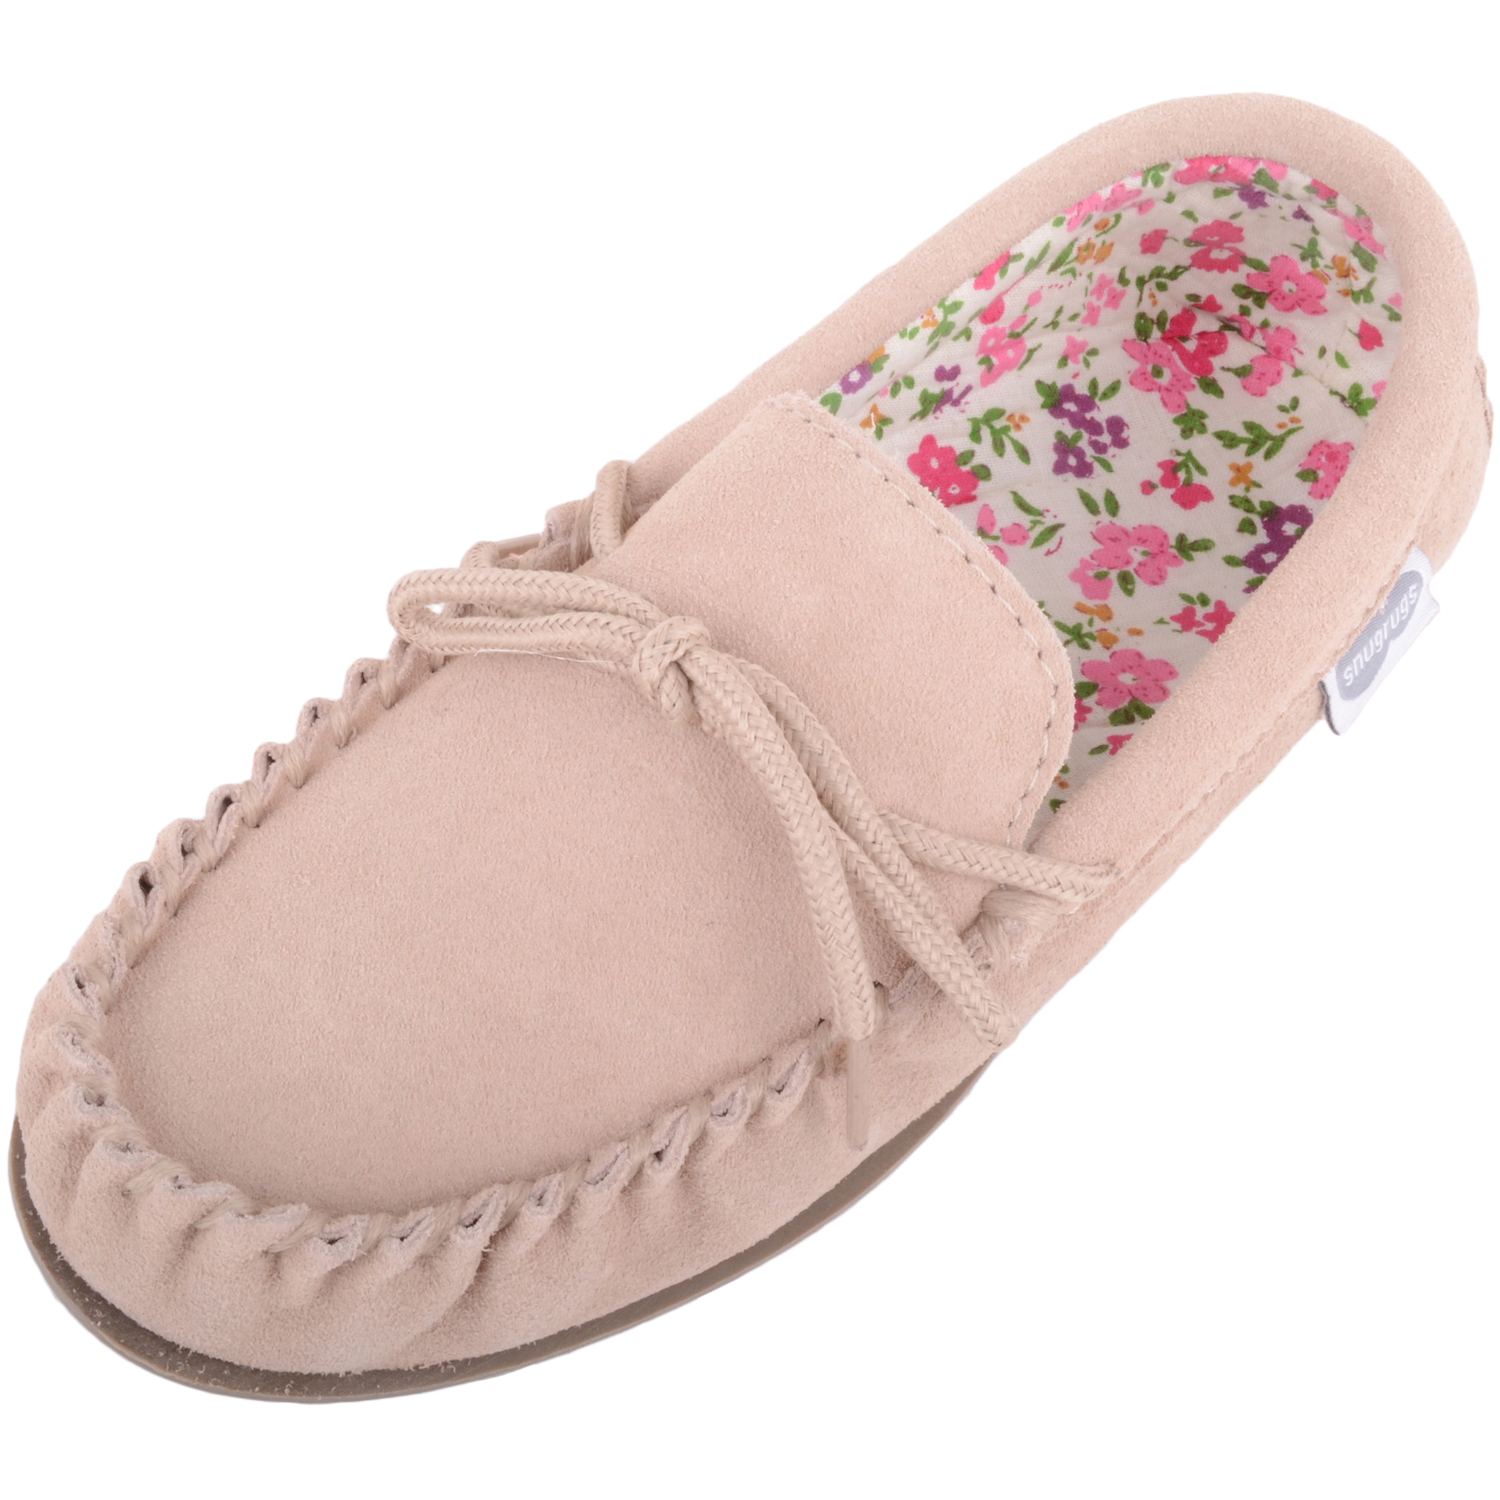 moccasin slippers womens